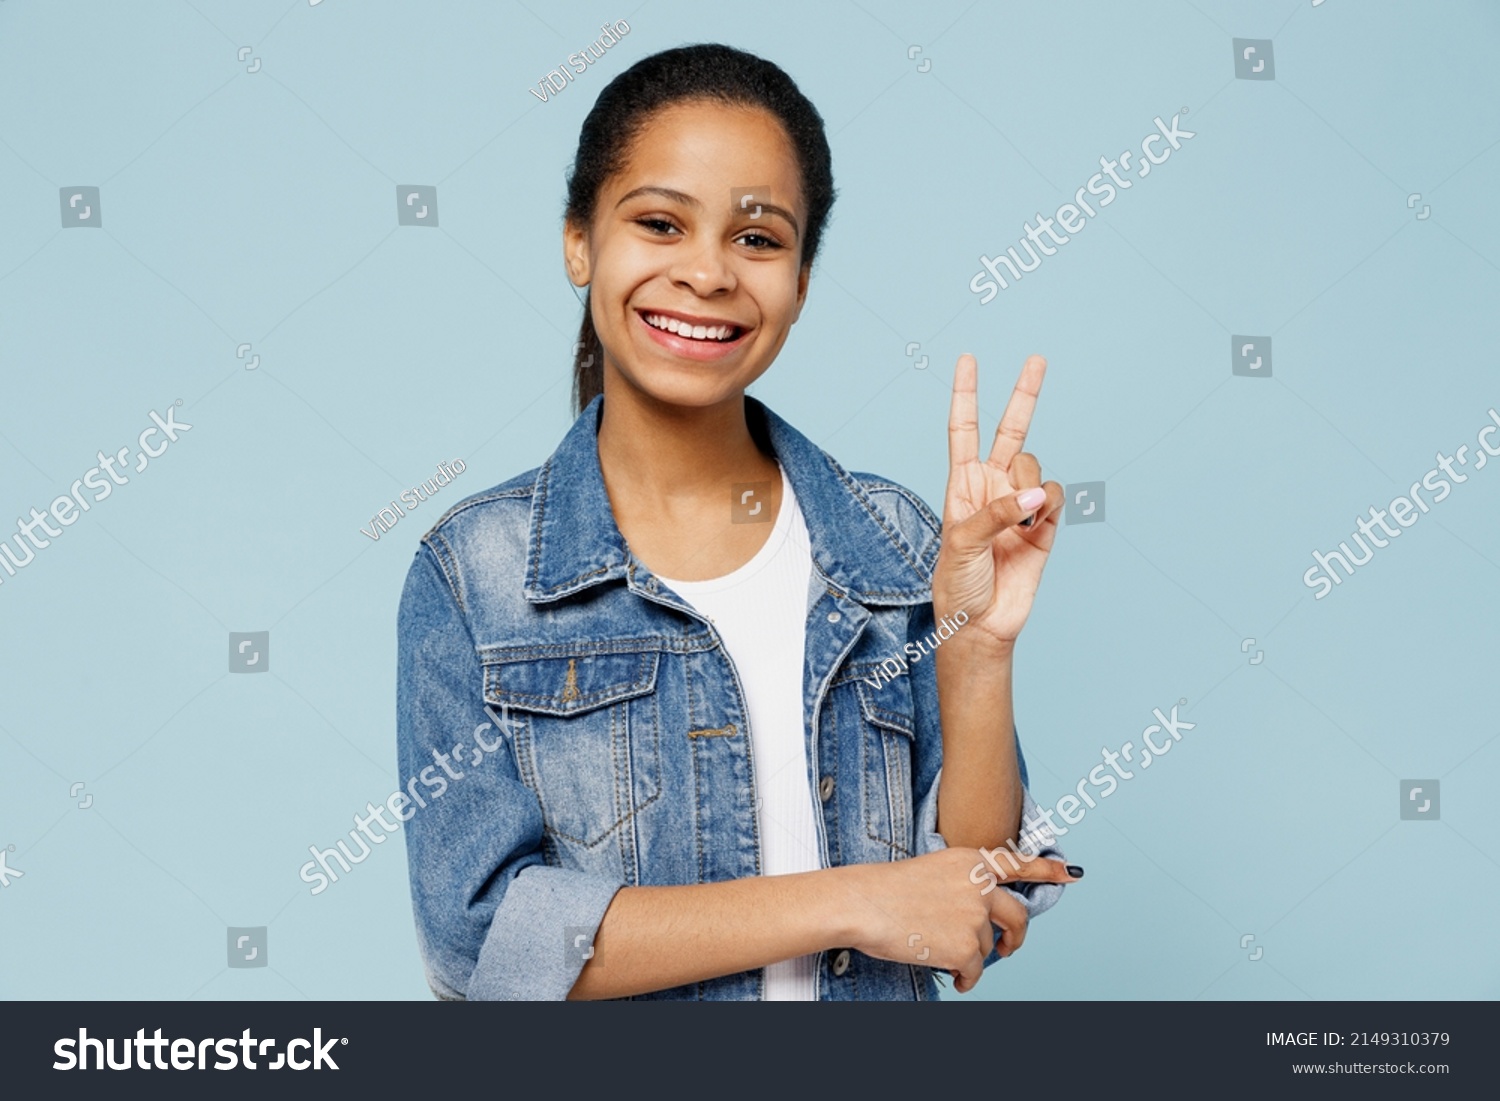 Little Smiling Happy Friendly Cool Kid Stock Photo 2149310379